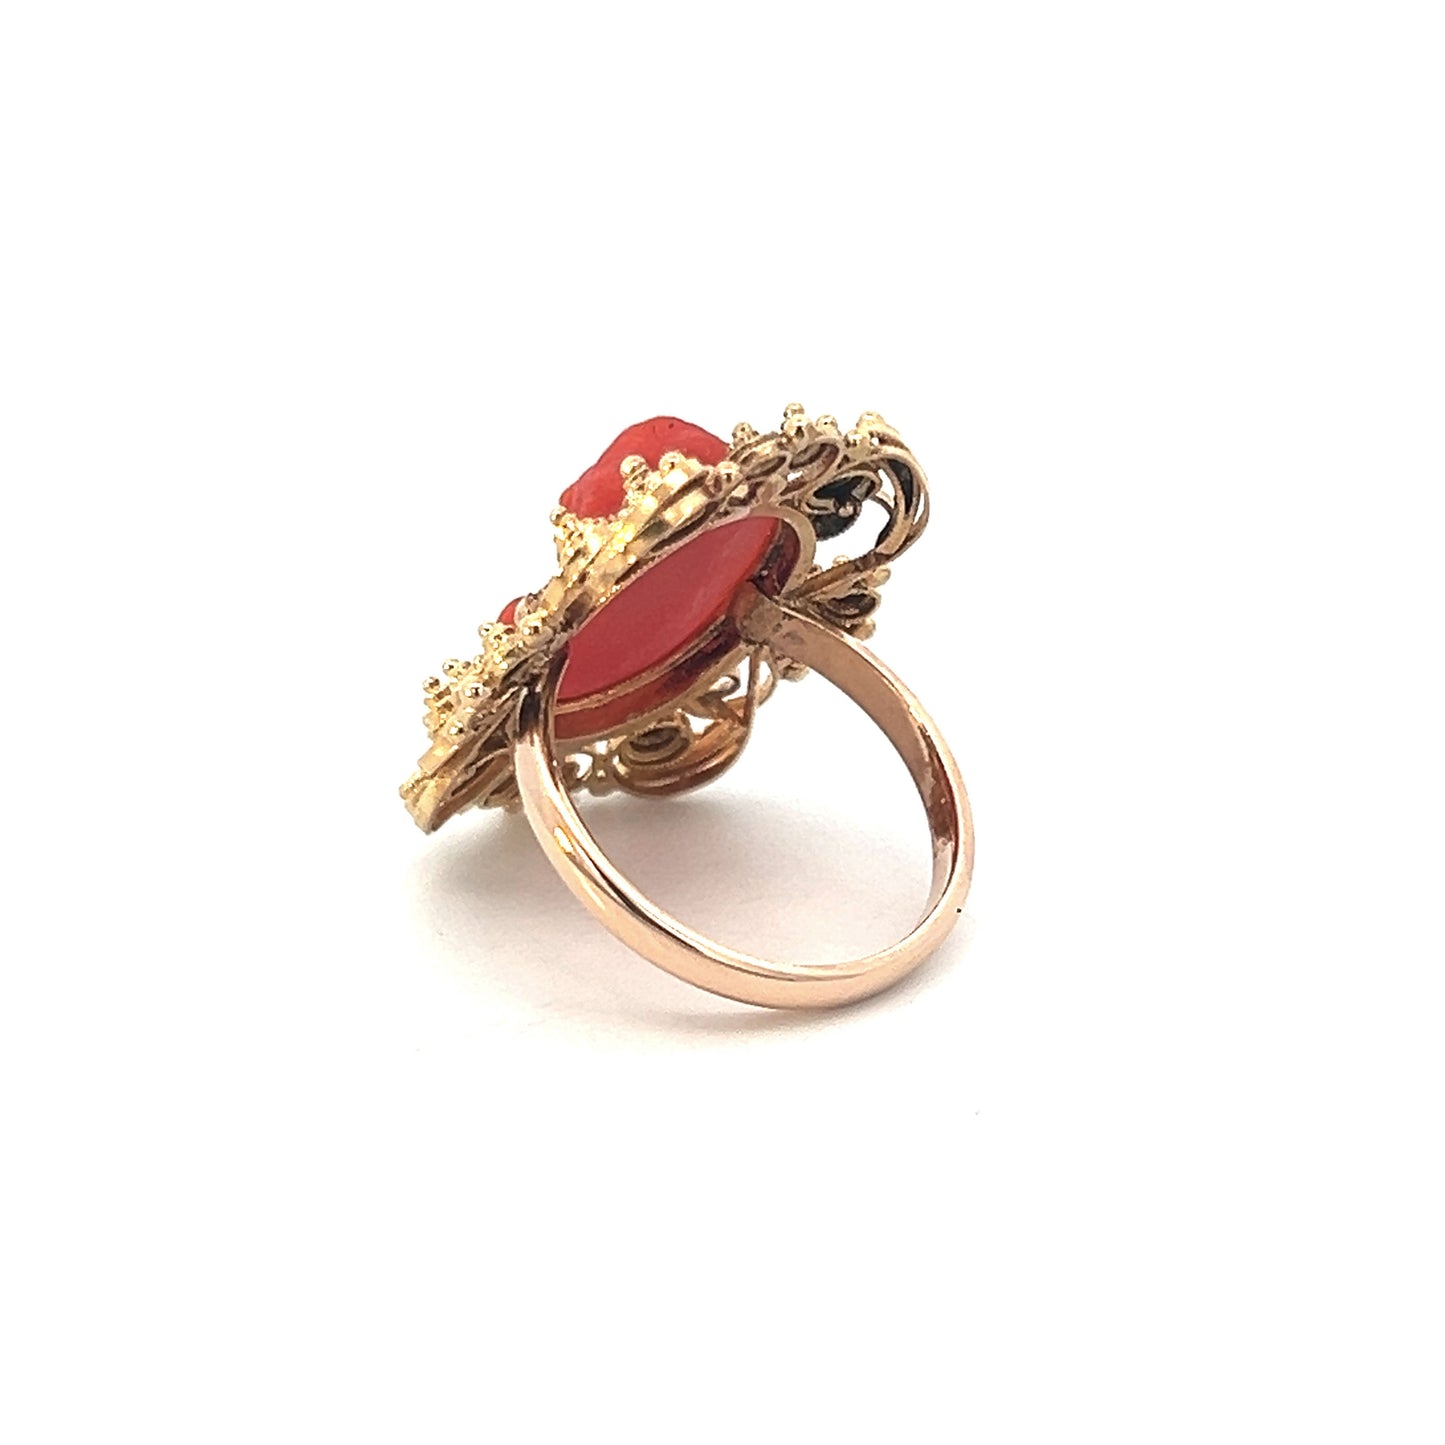 Vintage 9K Yellow Gold Carved Coral Cameo Ring